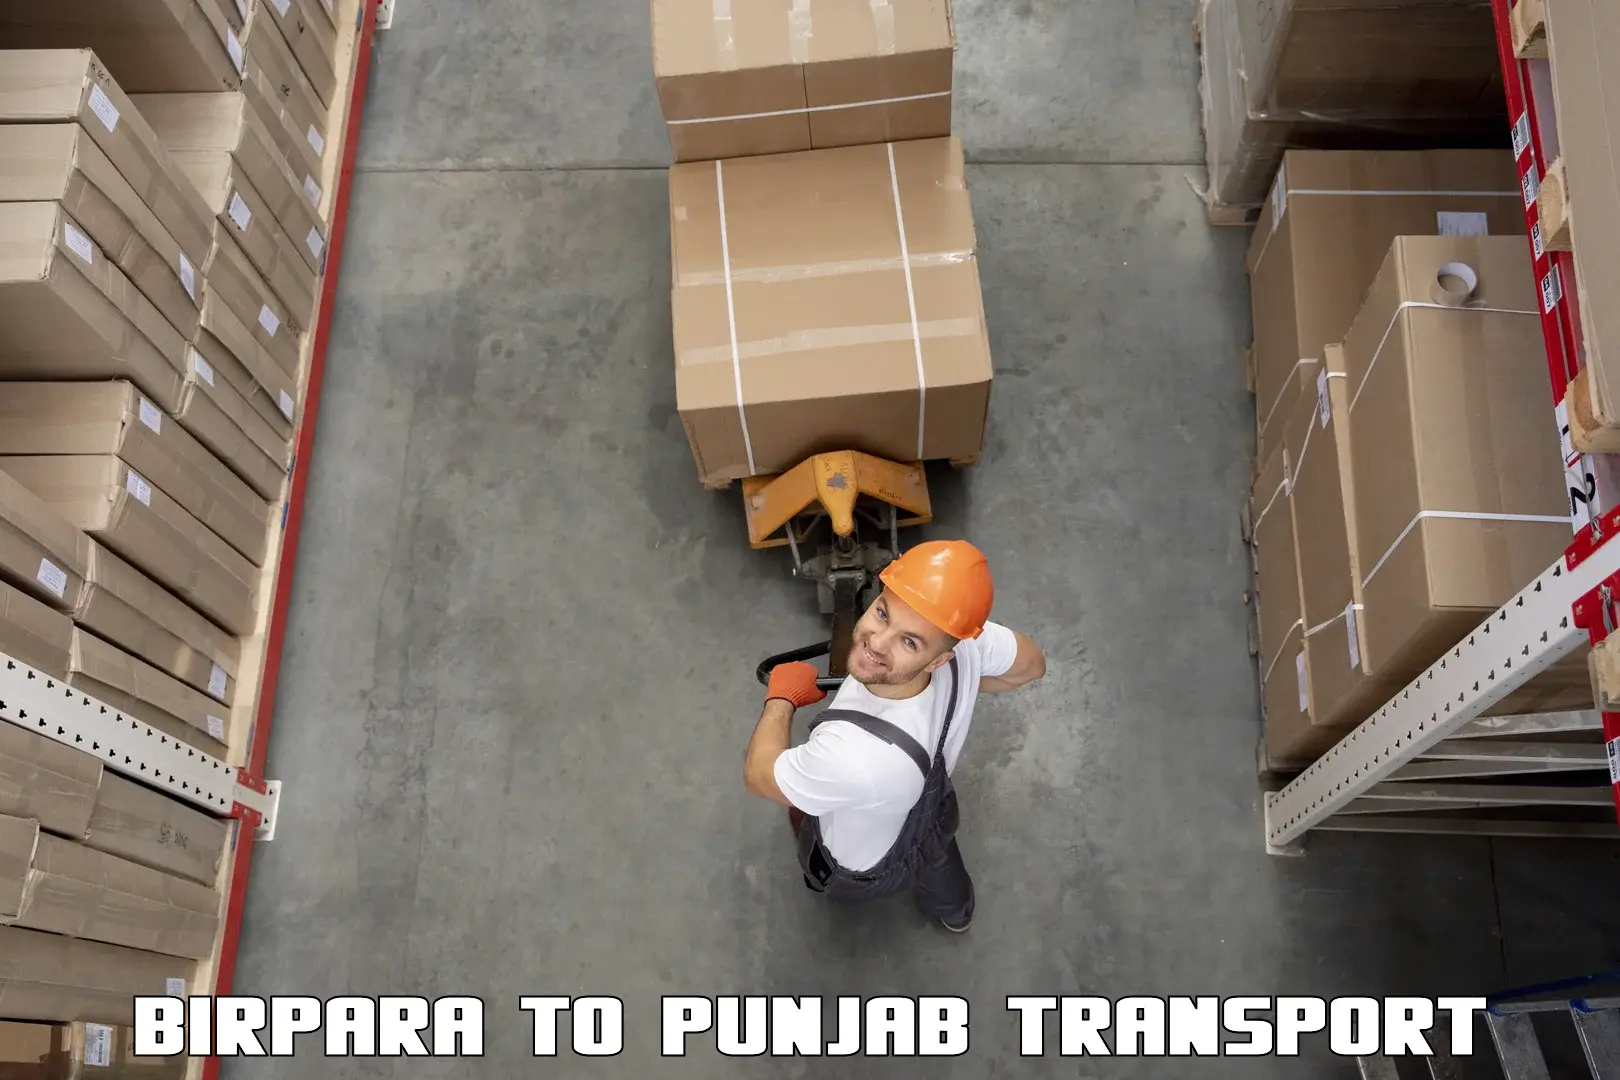 All India transport service Birpara to Mohali